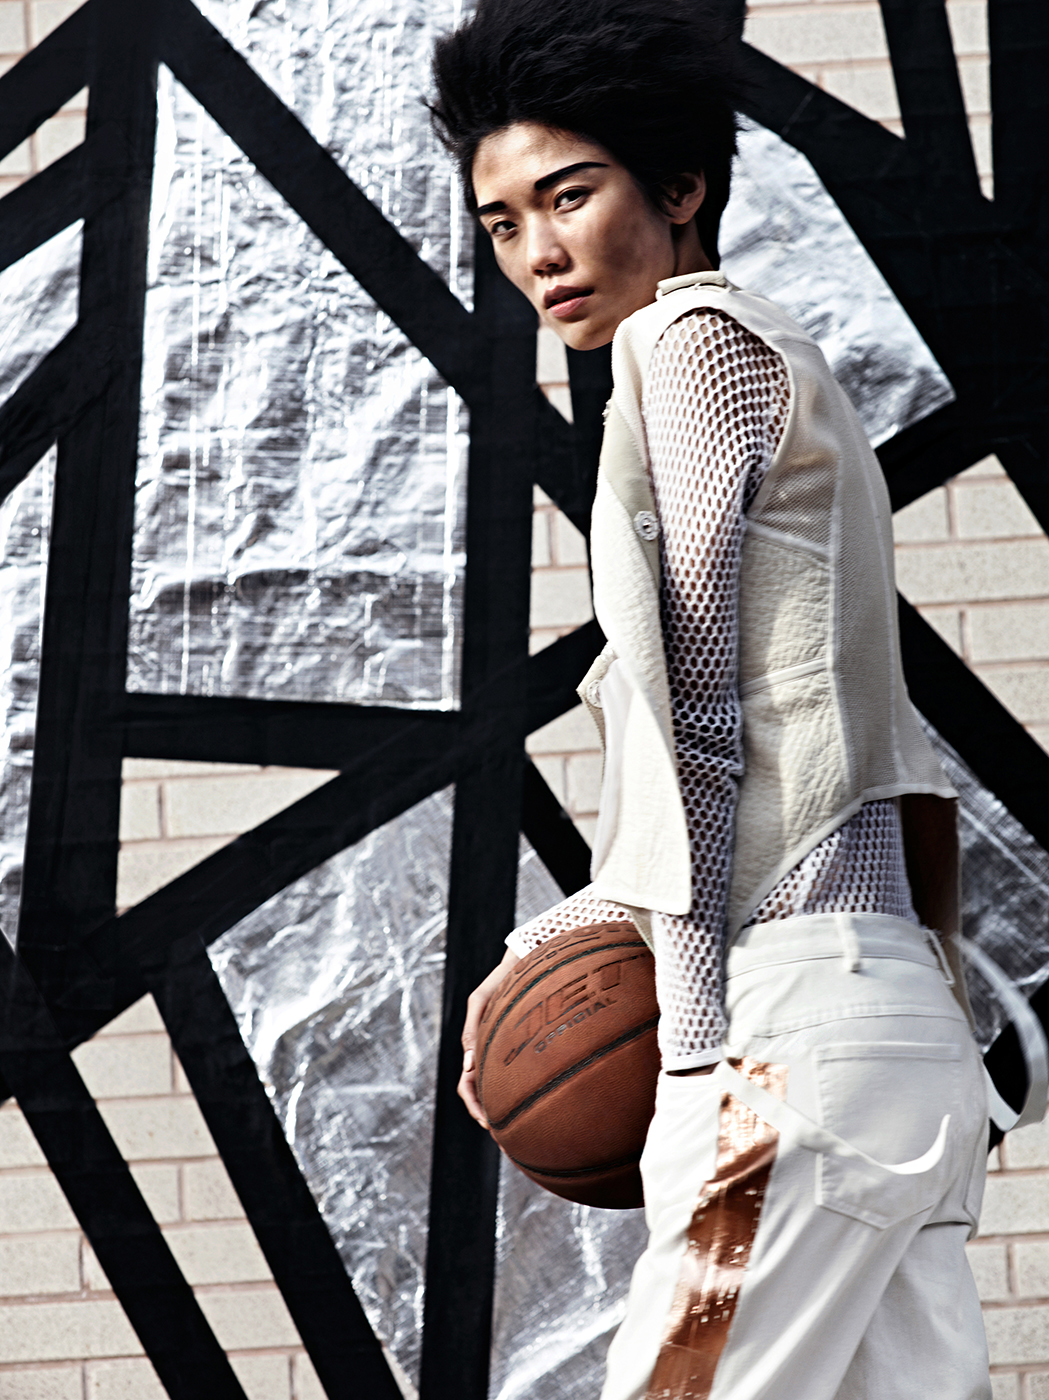 tao okamoto shot for intermission magazine by patrik sehlstedt